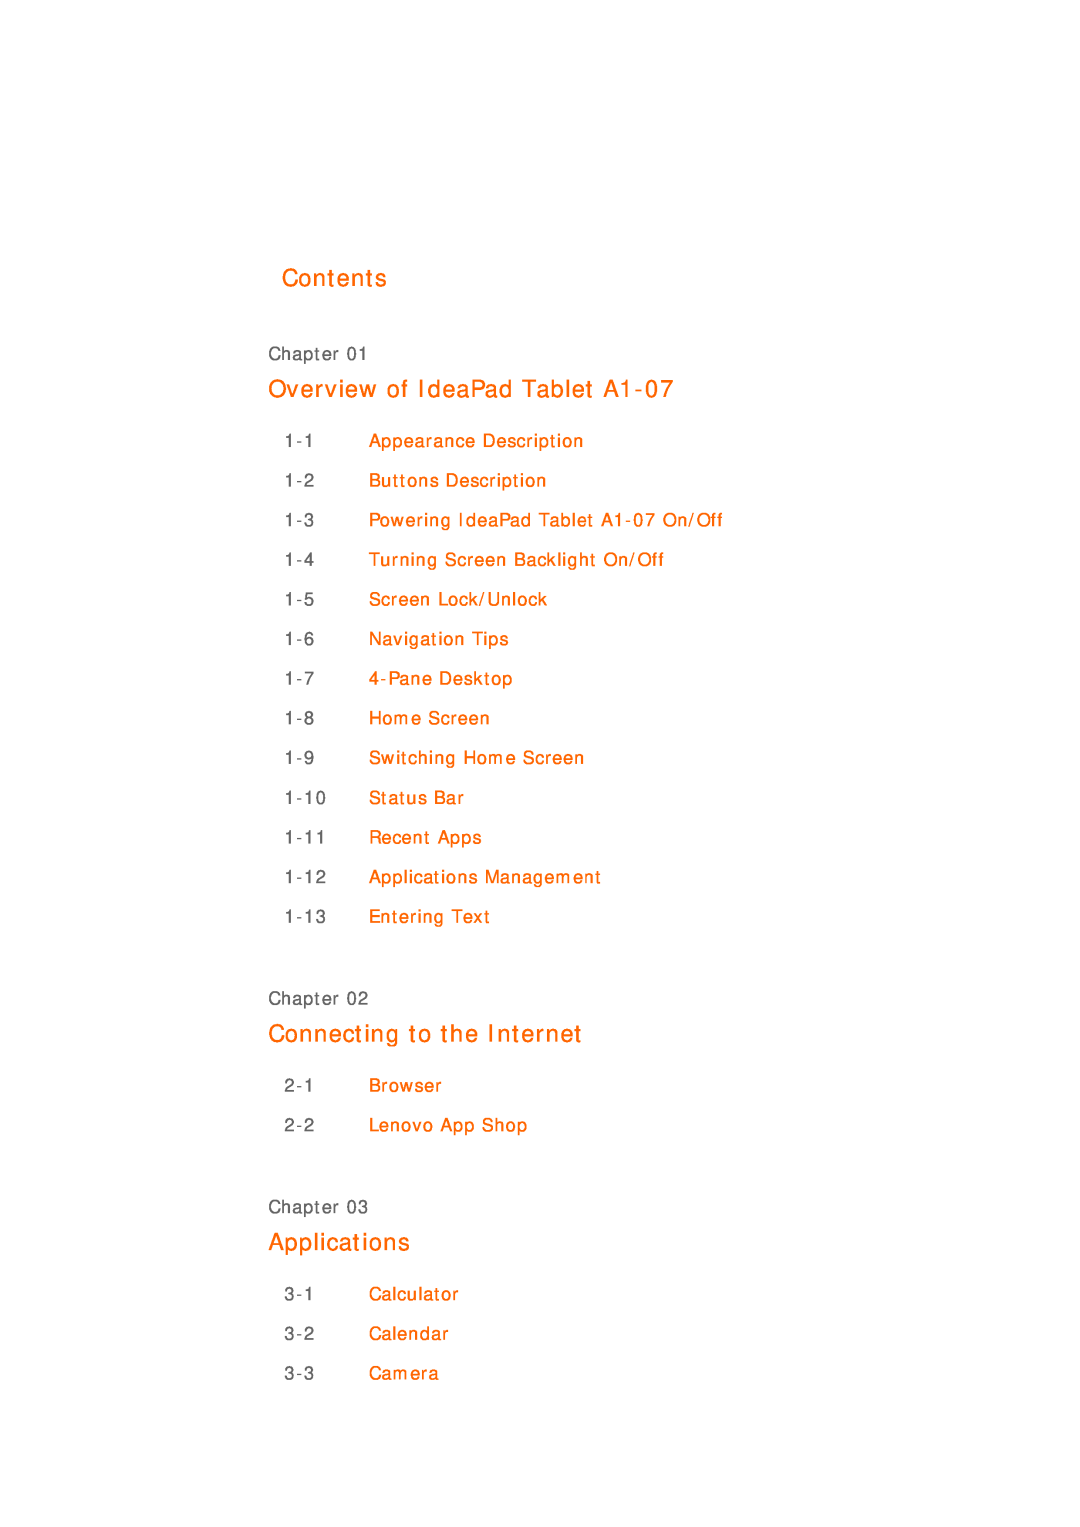 Lenovo 22282EU manual Contents, Overview of IdeaPad Tablet A1-07, Connecting to the Internet, Applications 